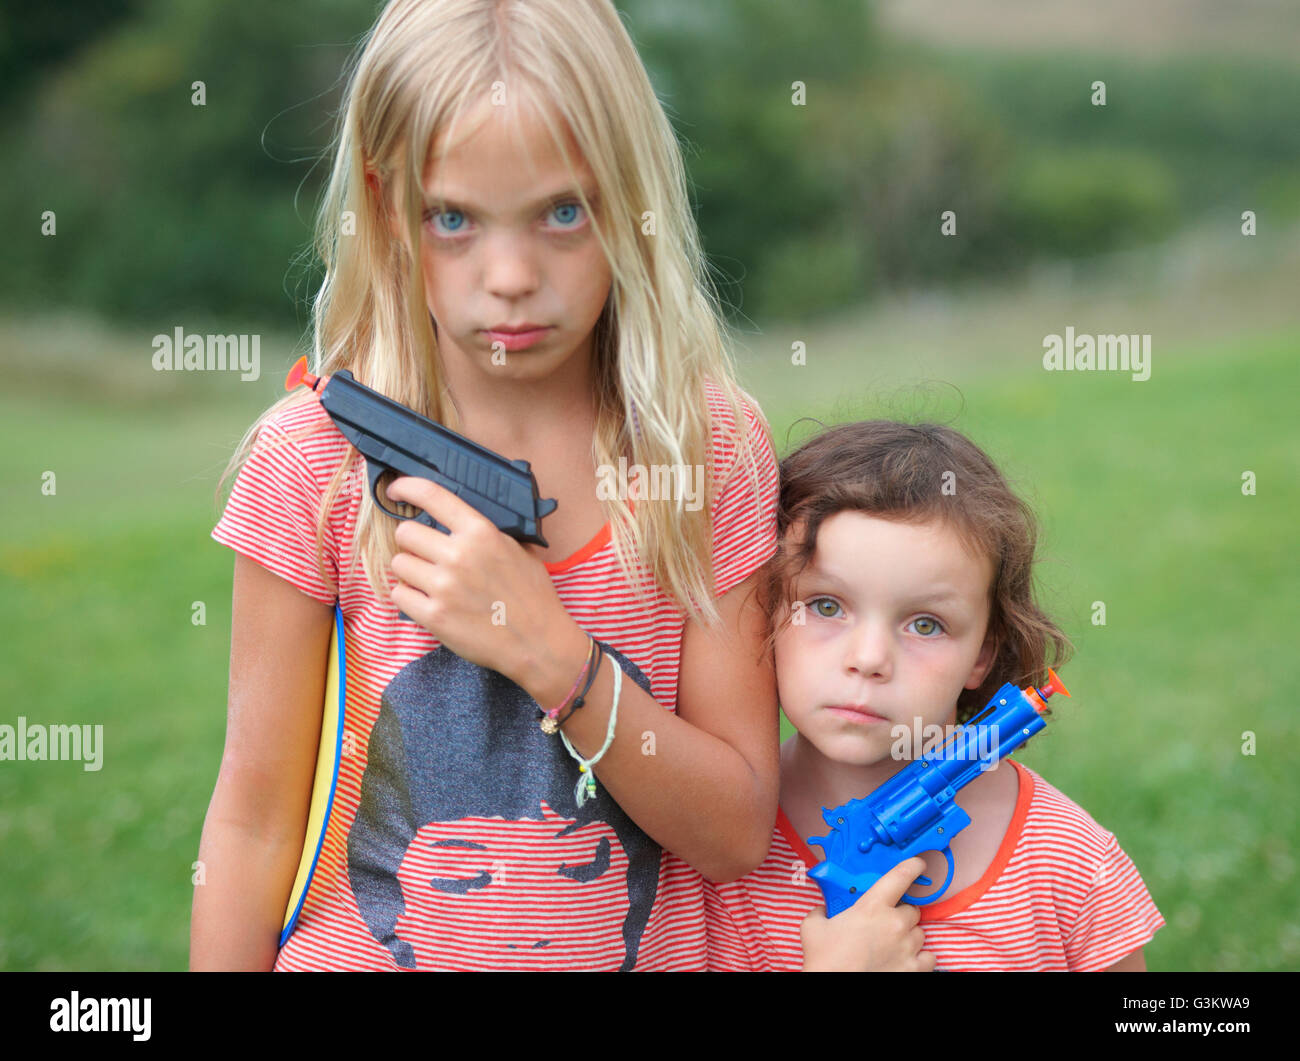 Portrait of two young sisters, holding toy guns Stock Photo